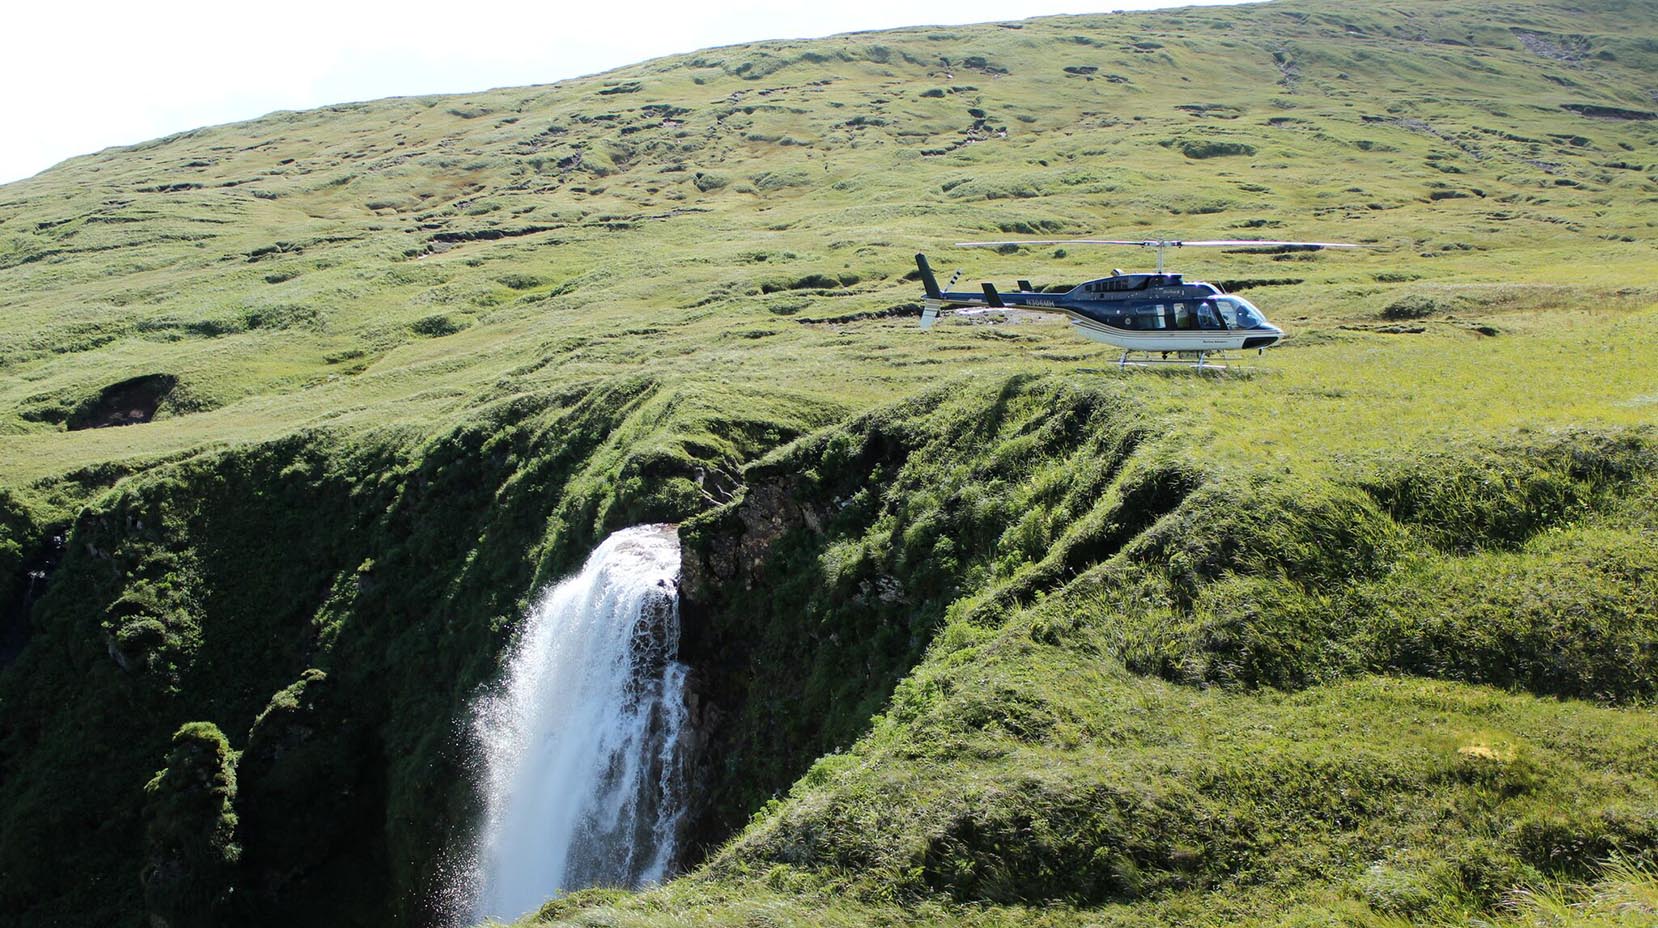 Maritime Helicopters at work in the aleutians